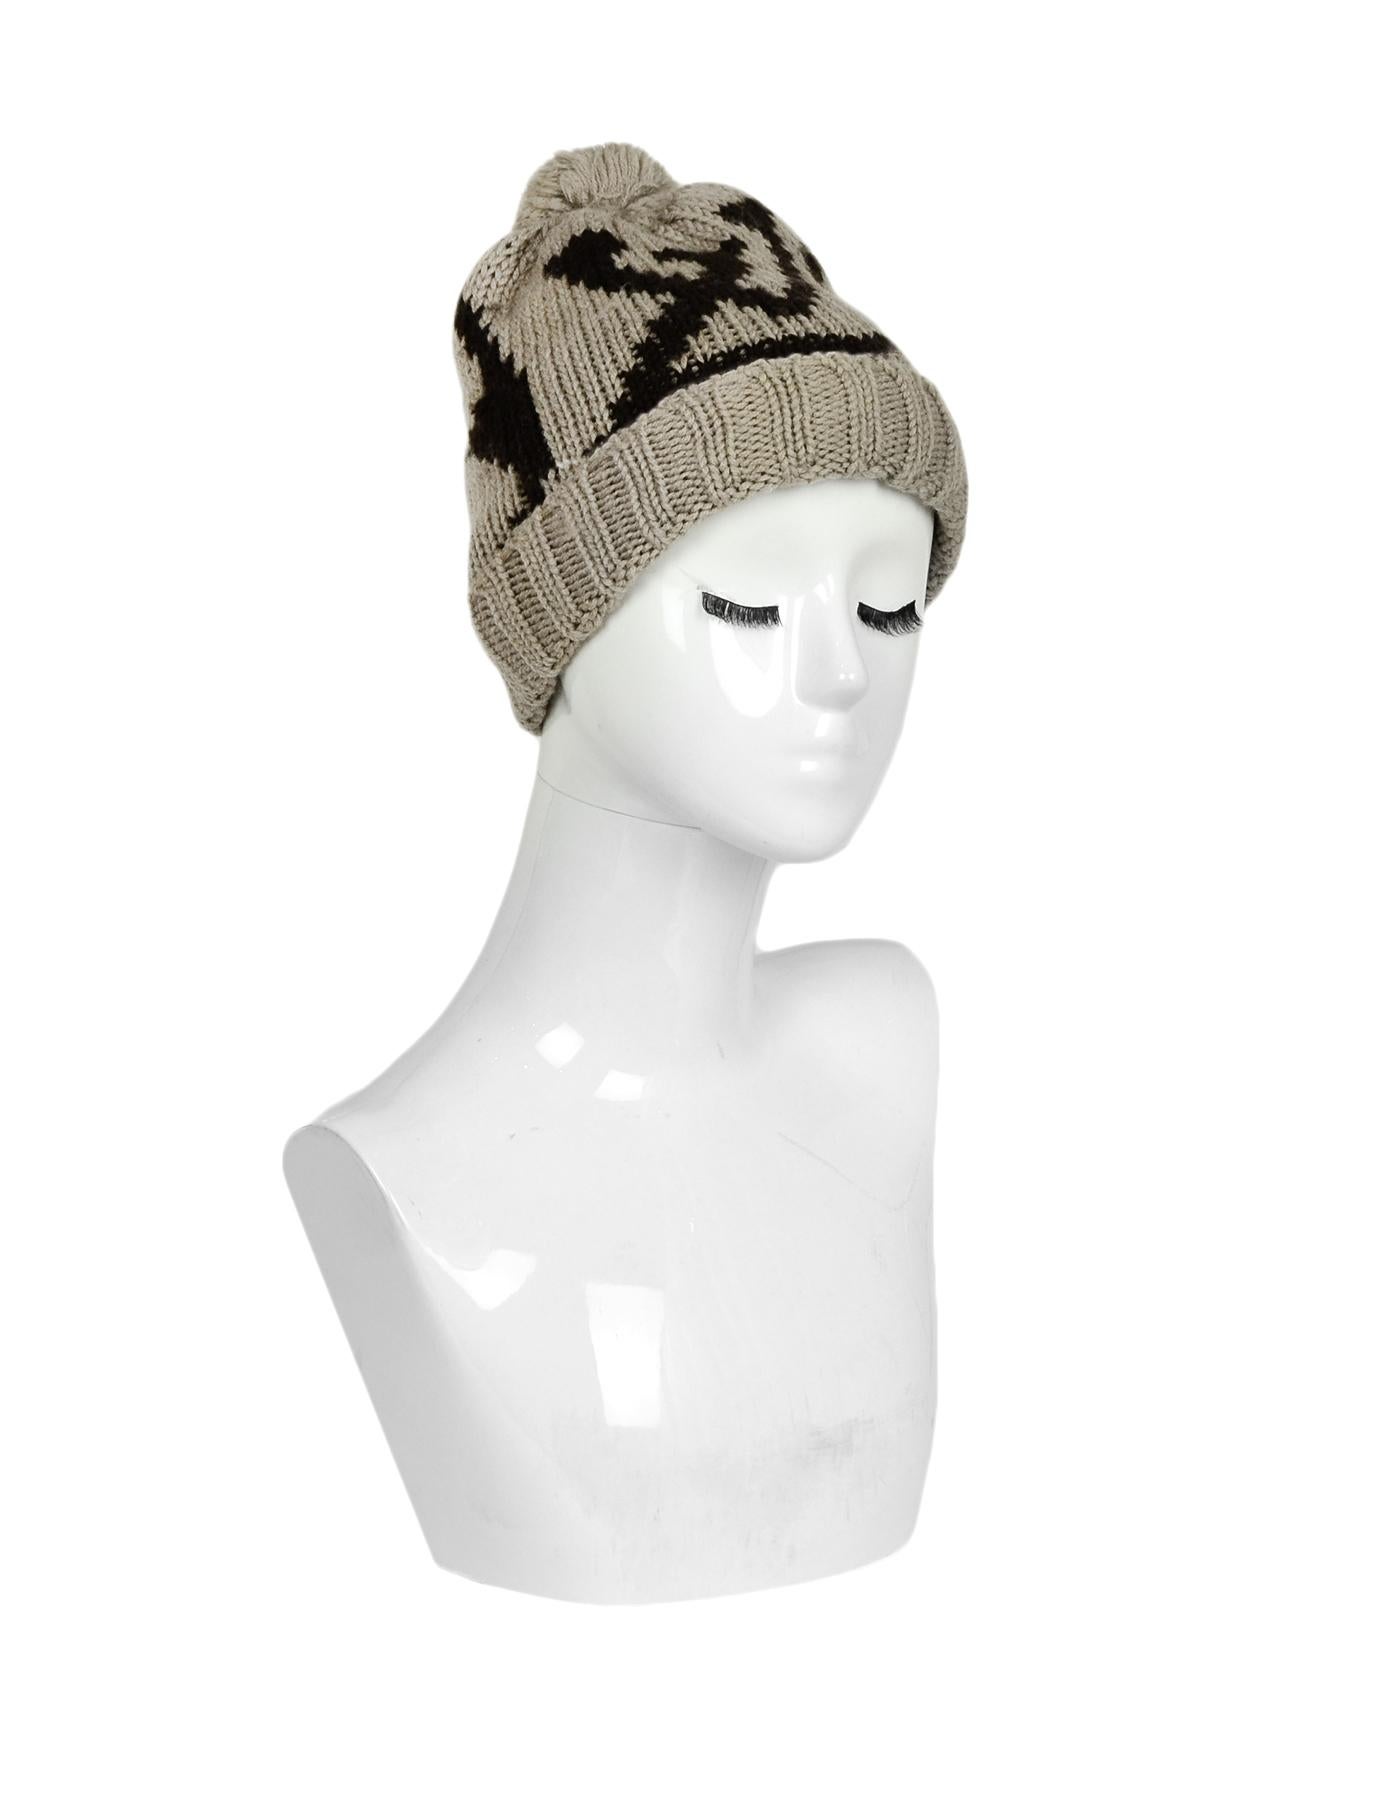 Louis Vuitton Taupe Brown Monogram Wool Grand Froid Pom Beanie

Made In: Italy
Color: Taupe, Brown
Materials: 100% Wool
Overall Condition: Excellent pre-owned condition

Measurements: 
9